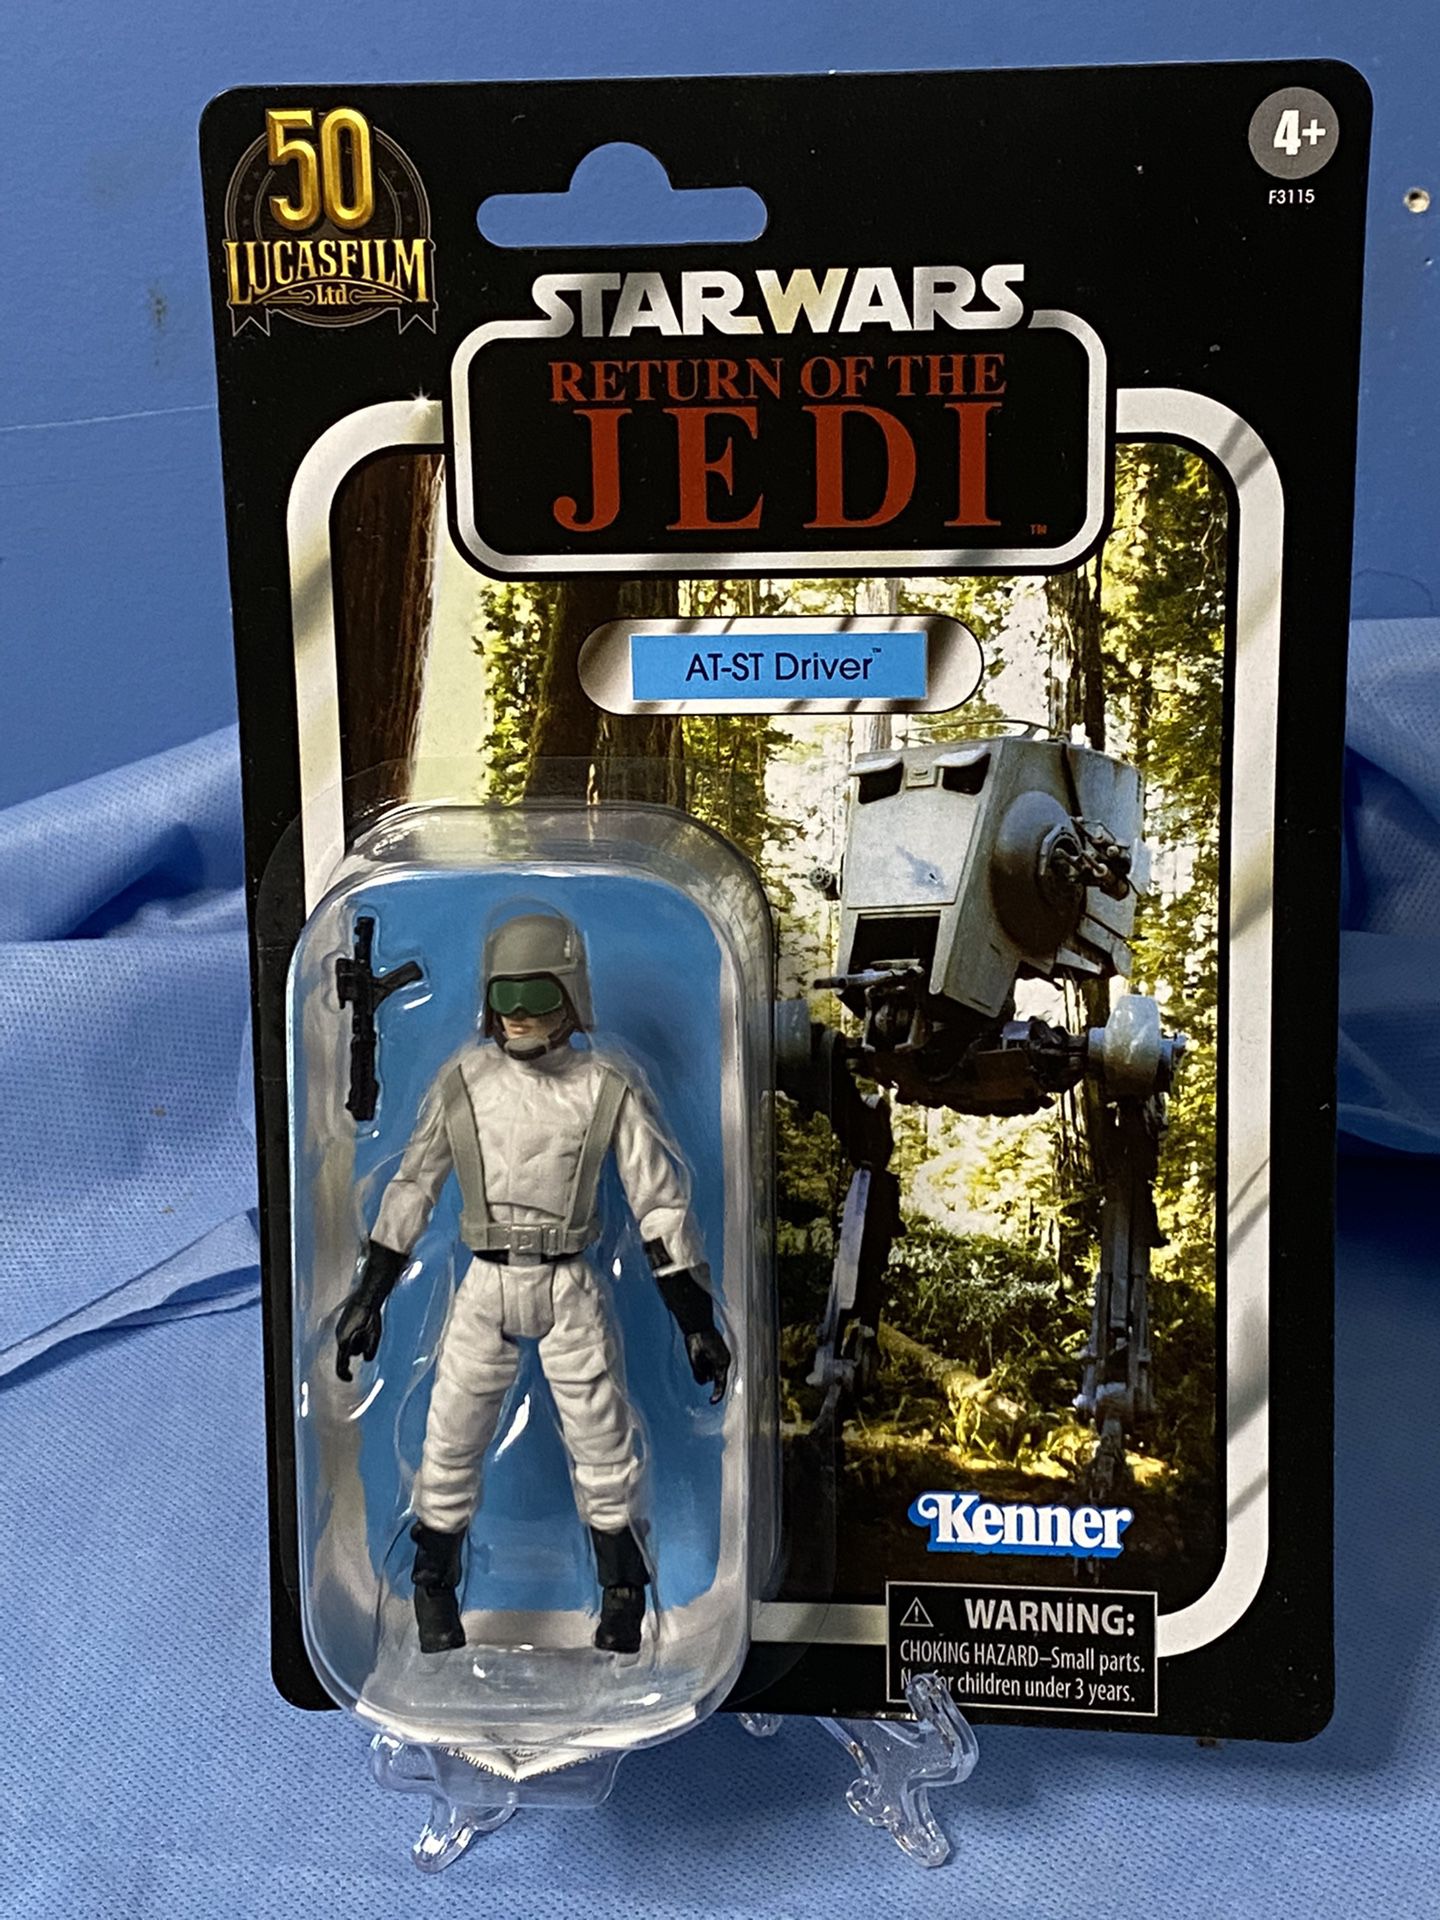 Star Wars The Vintage Collection AT-ST Driver Toy, 3.75-Inch Lucasfilm Figure